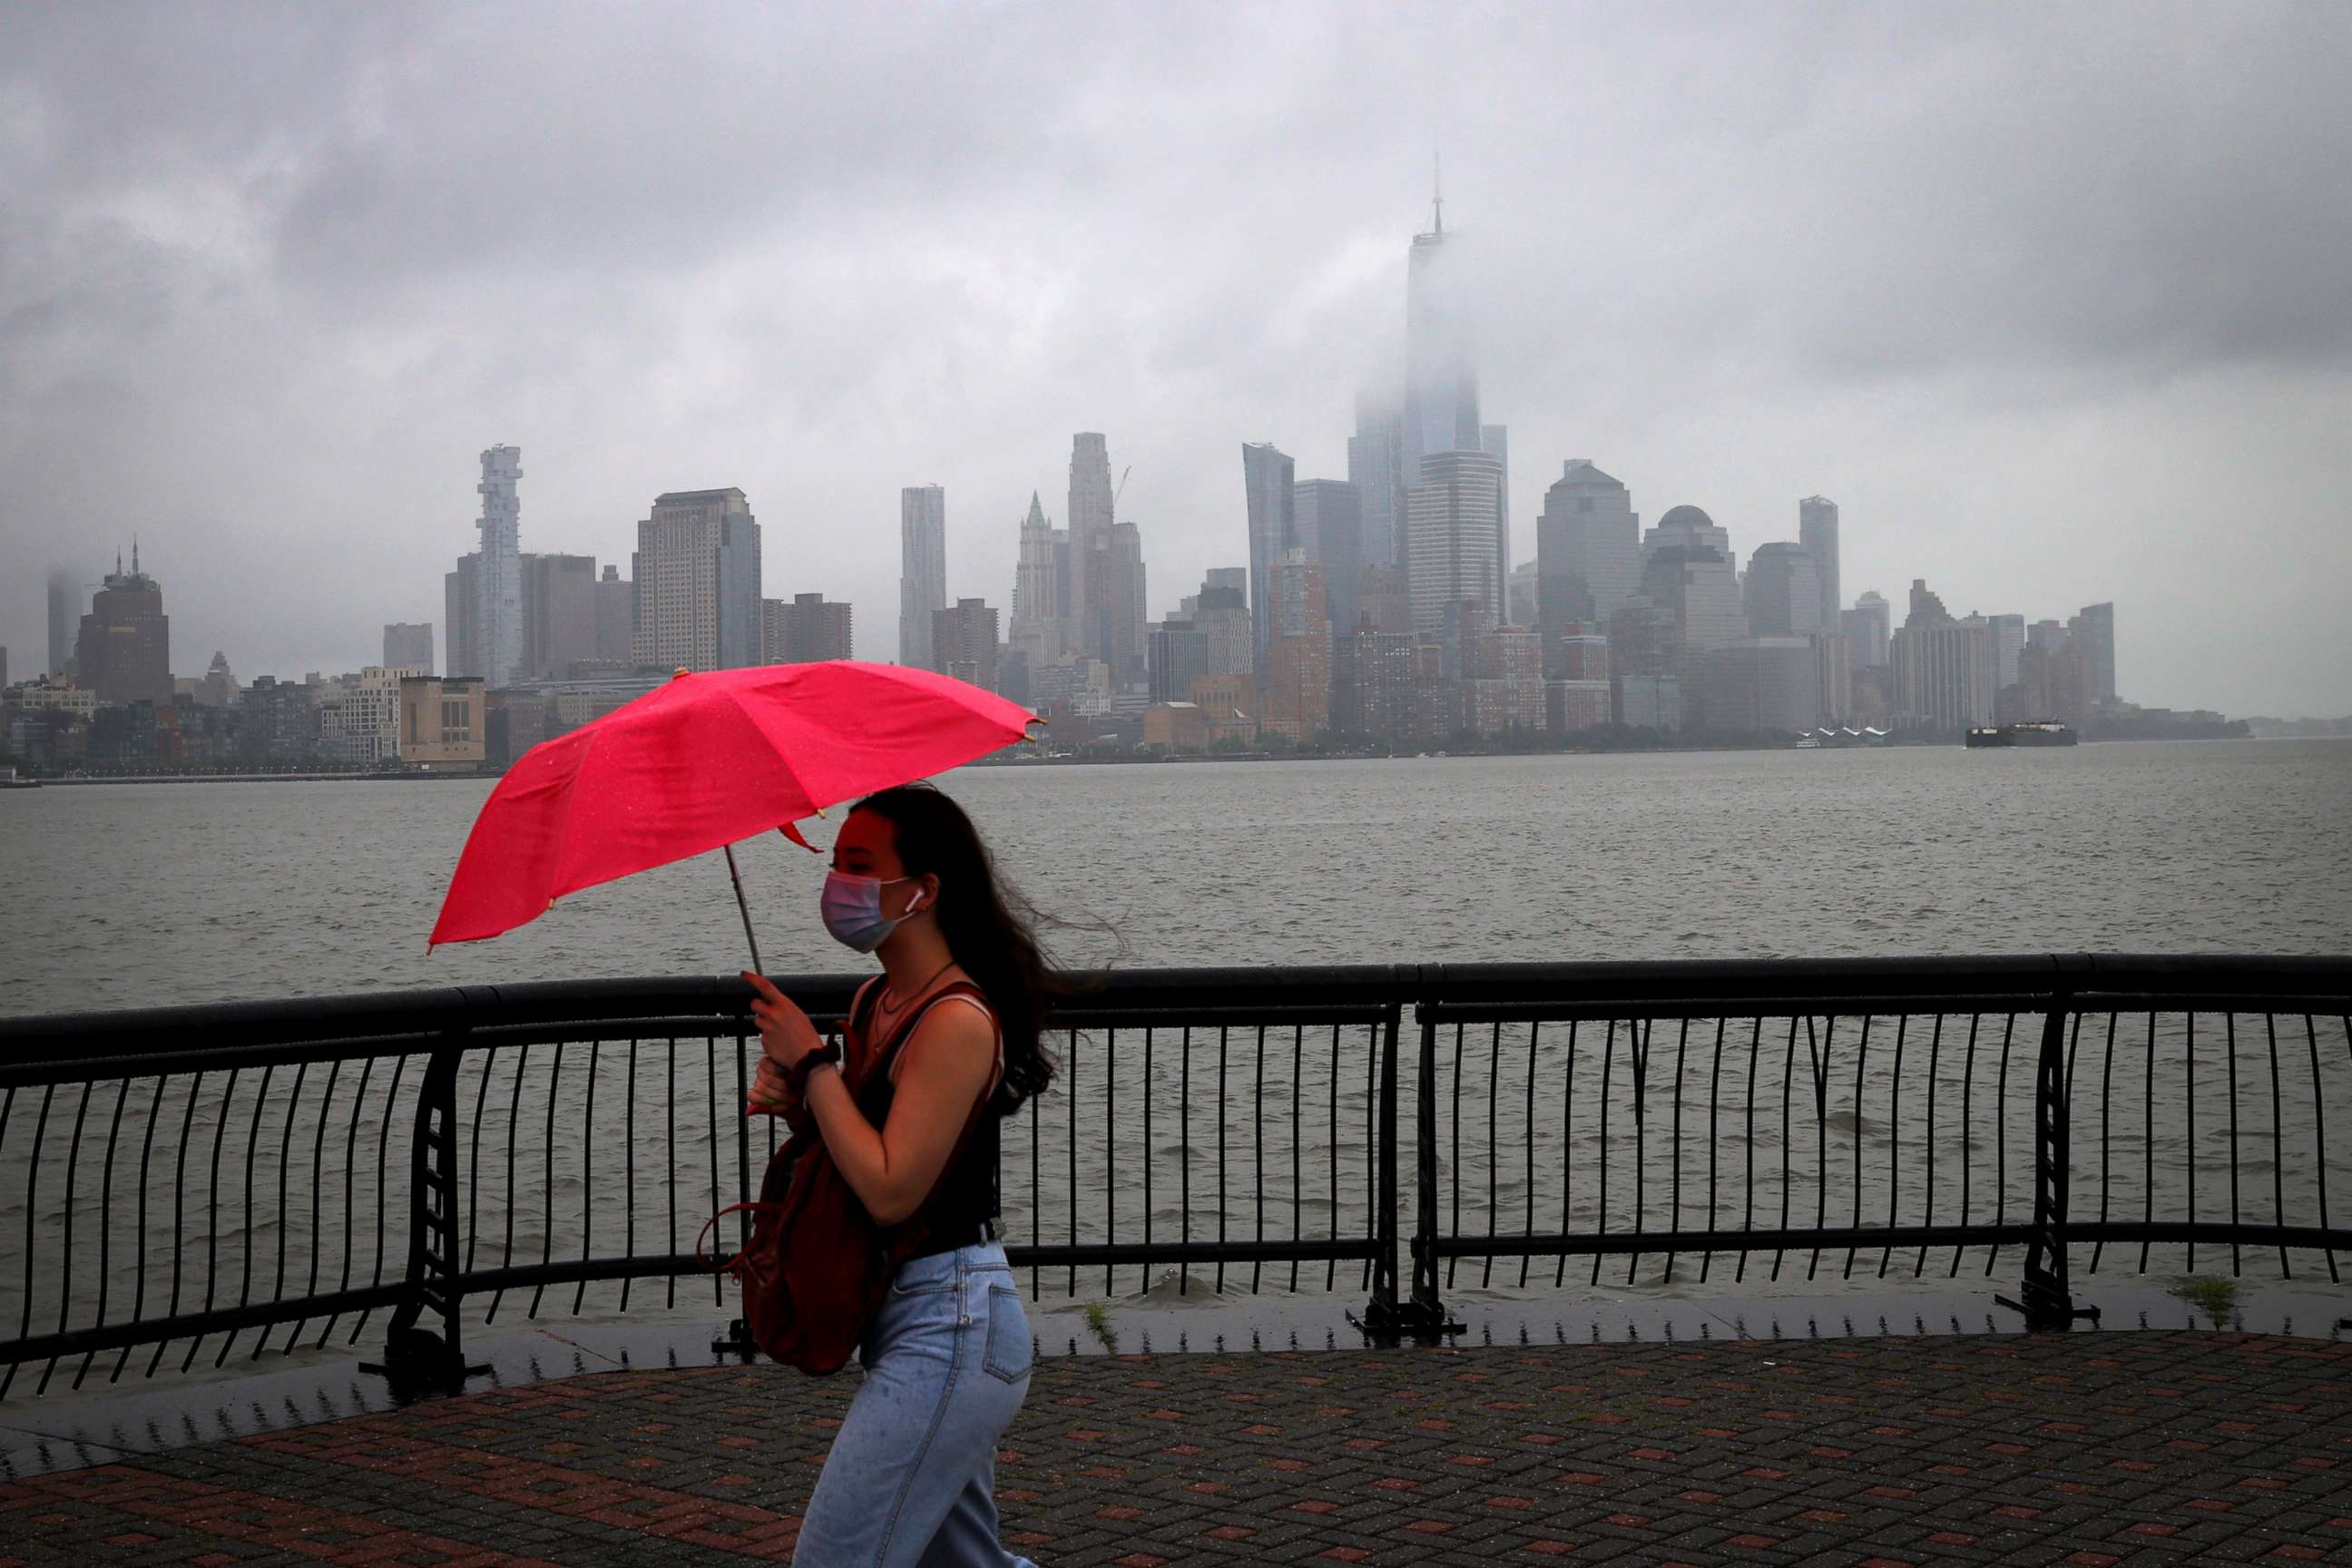 PHOTO: A woman, in Hoboken, N.J., shields herself from rain and wind with an umbrella as she walks along the Hudson River in front of the skyline of New York City, as Tropical Storm Fay is expected to sweep across the northeastern US, July 10, 2020.